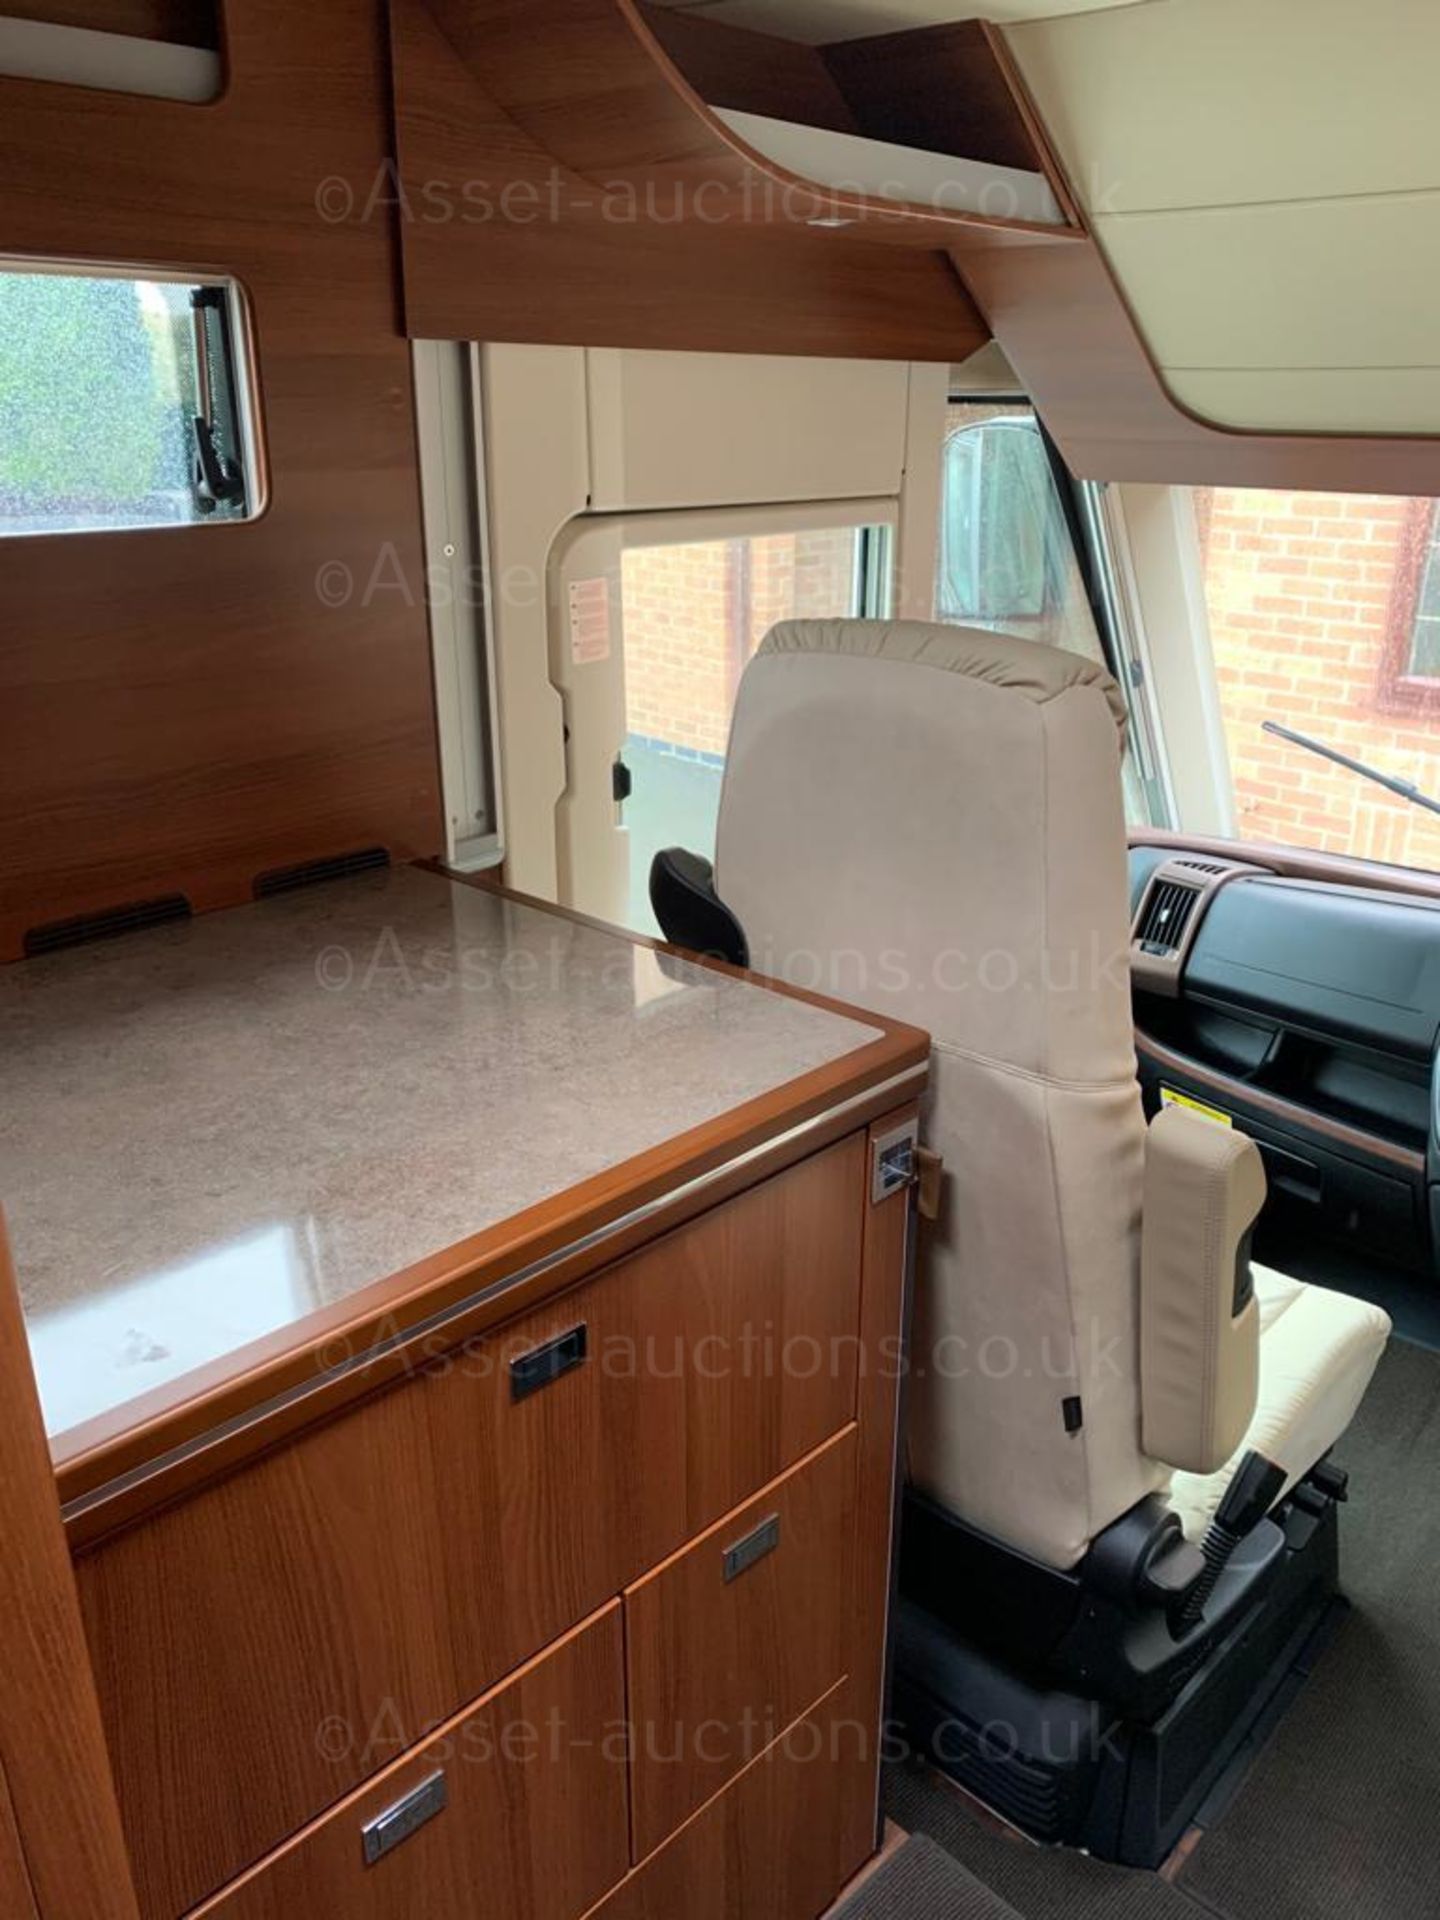 2020 CARTHAGO LINER-FOR-TWO 53L MOTORHOME, SHOWING 4529 MILES, MINT CONDITION *NO VAT* - Image 25 of 33